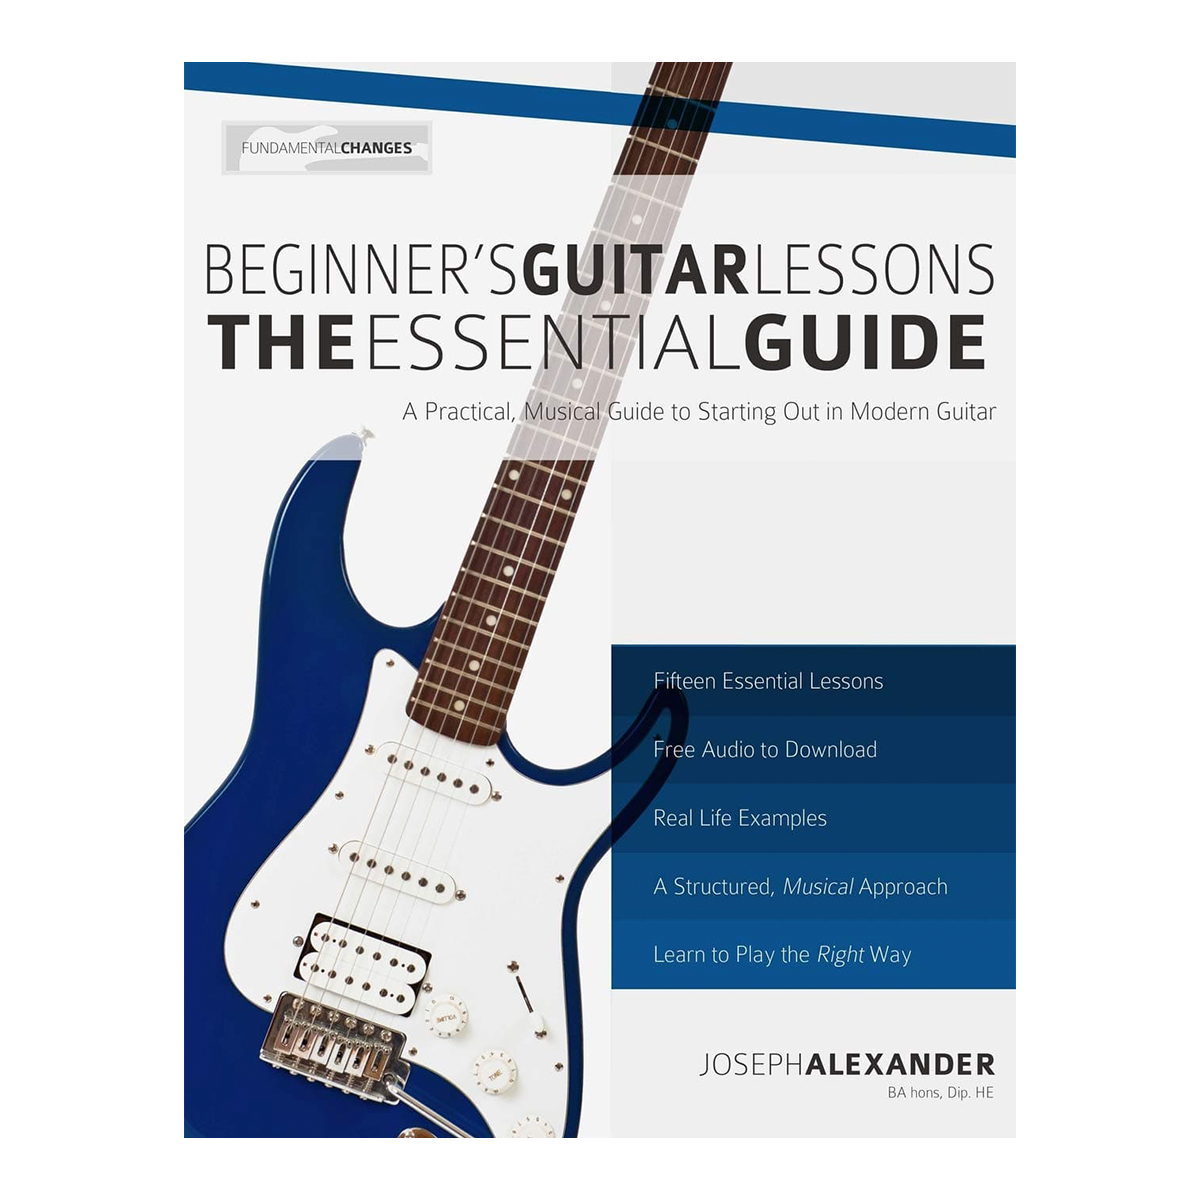 Beginner's Guitar Lessons - The Essential Guide